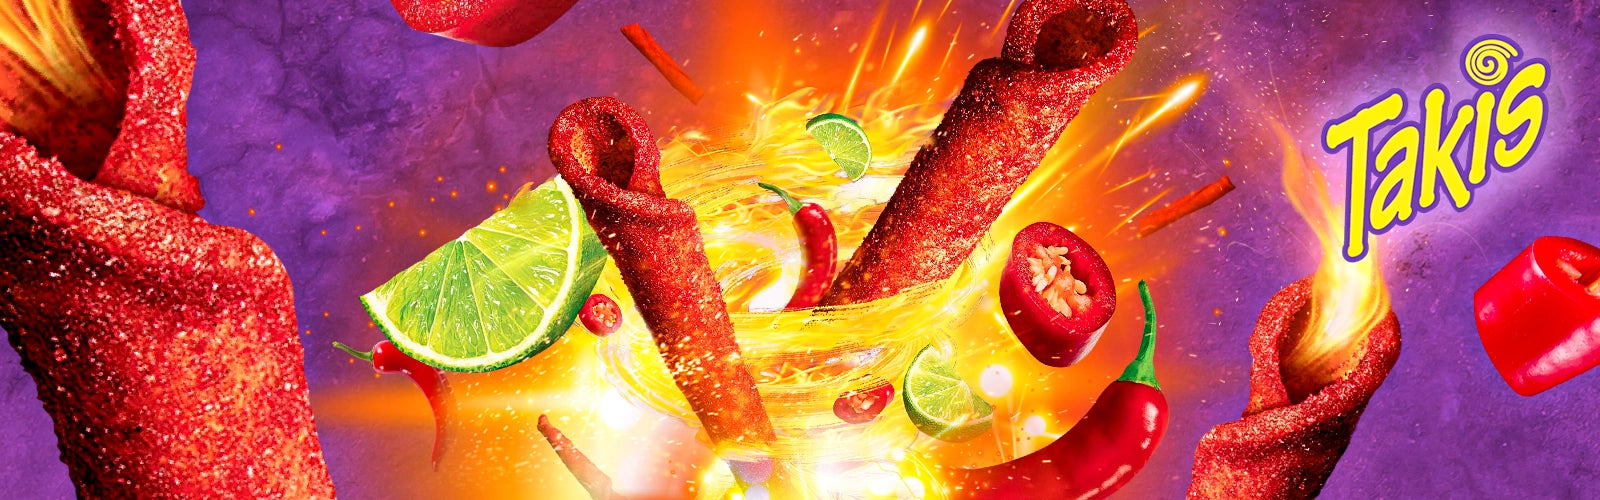 Takis in collection banner